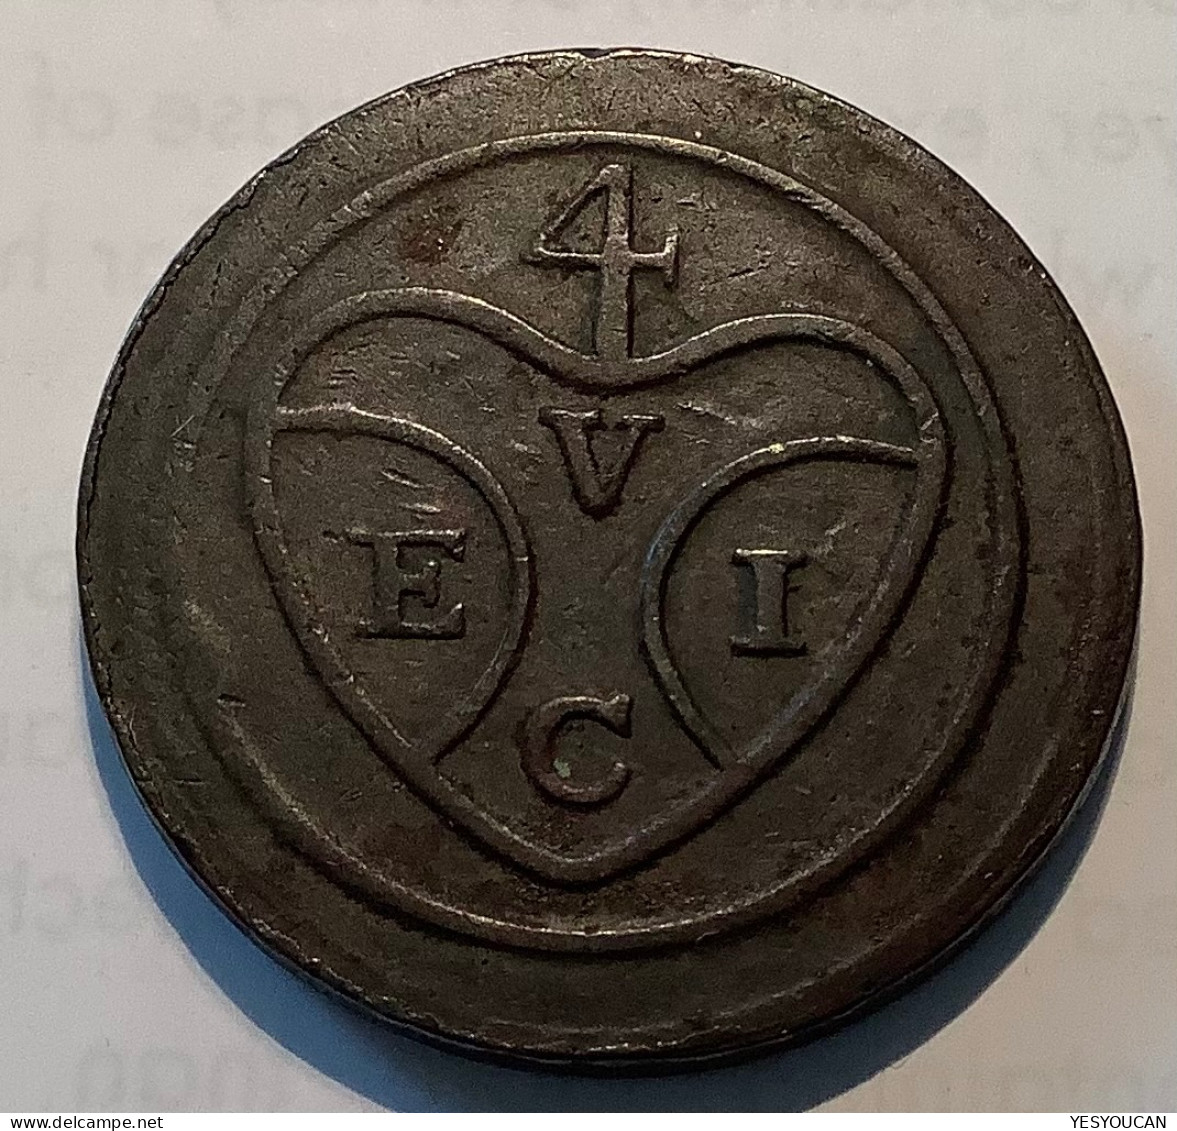 East India Company 19th C. Scarce Bronze Weight Or Token "4 / V E I C", Very Fine (Inde, Coin Monnaie - Indien